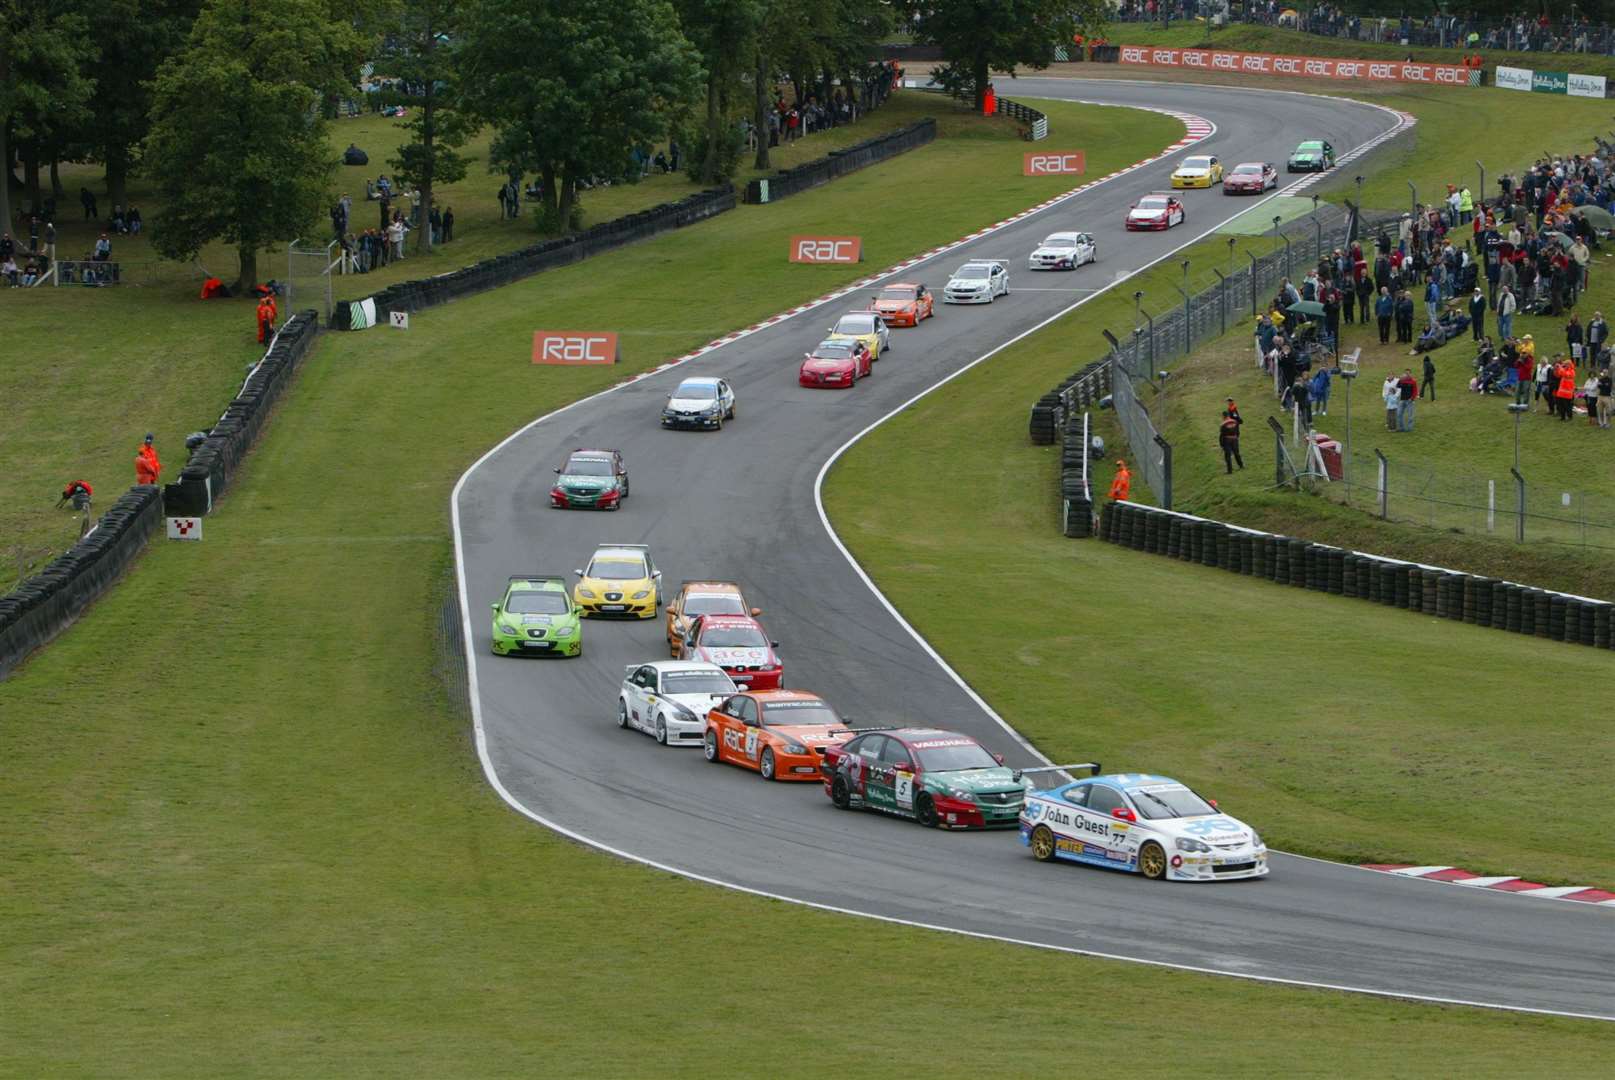 The race circuit has cancelled its midweek car meets. Picture: Peter Still